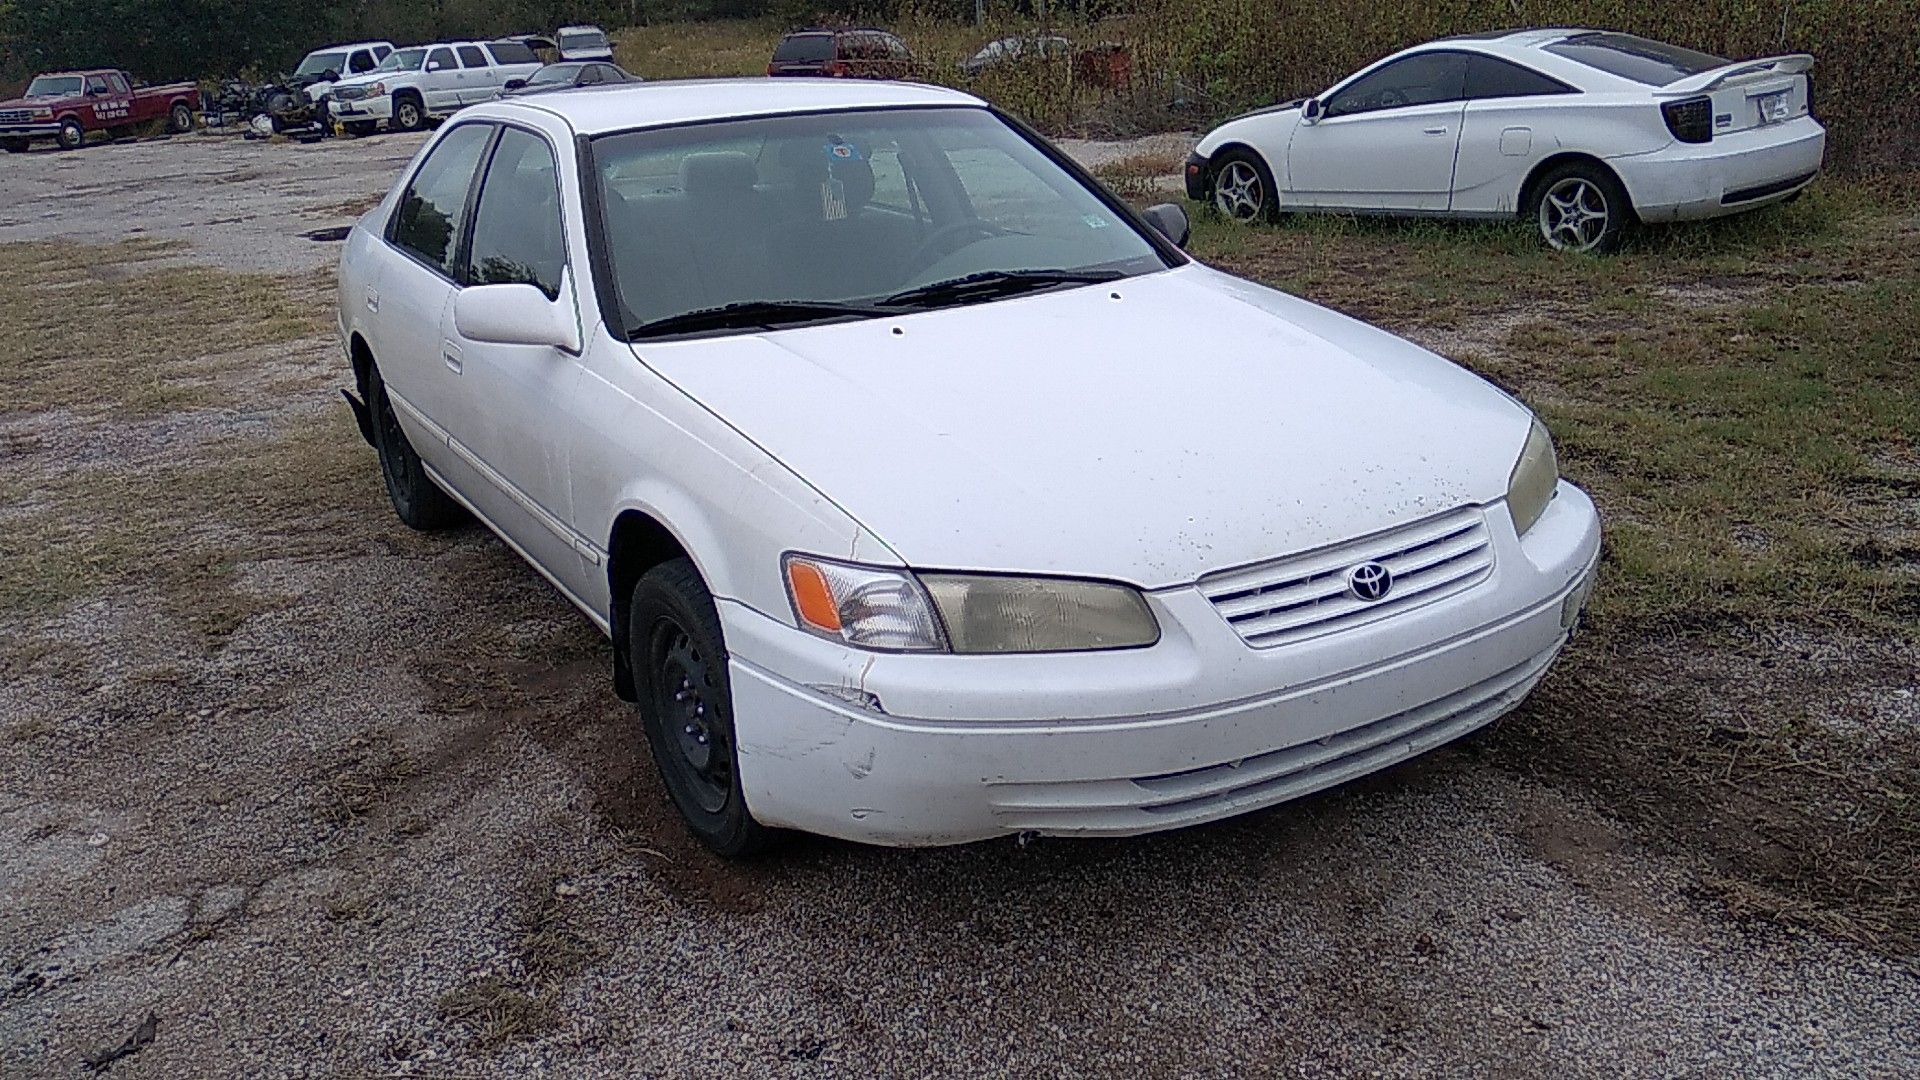 1998 Toyota Camry. Parts car